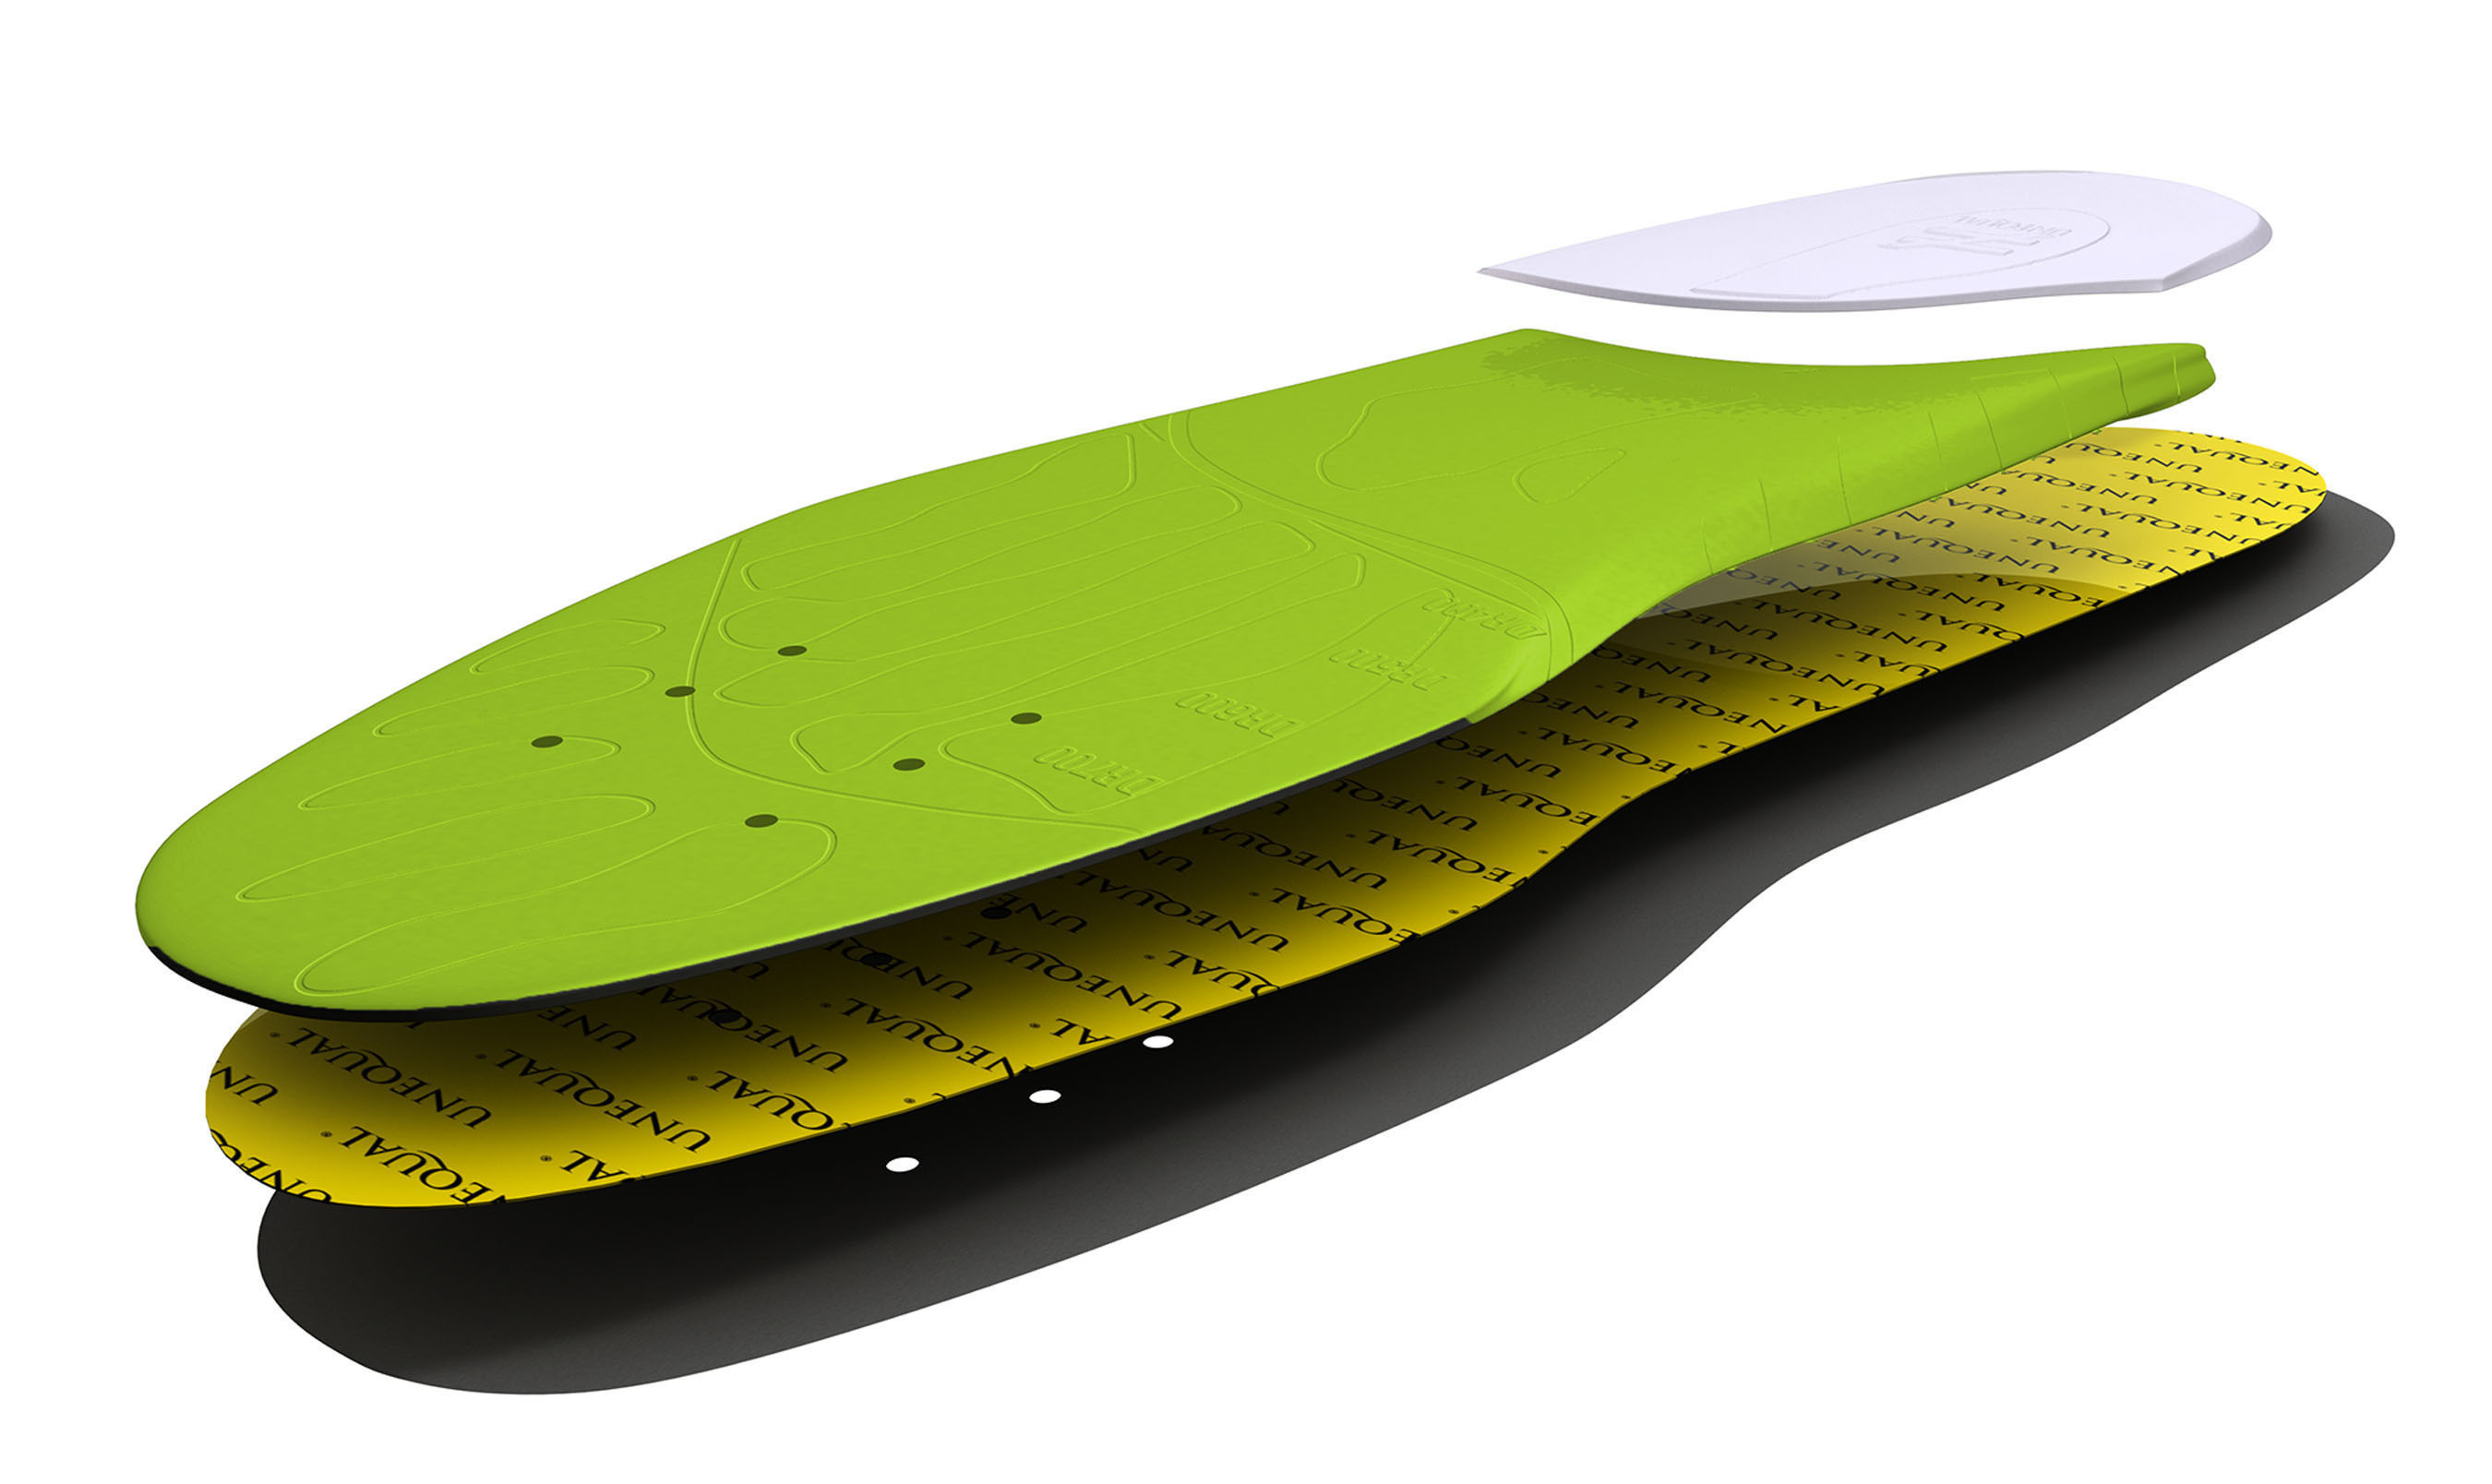 Unequal Ultrathin Insoles - Approved by the APMA, these insoles reduce the chronic impact shock by as much as 80 percent. (PRNewsFoto/Unequal Technologies) (PRNewsFoto/UNEQUAL TECHNOLOGIES)